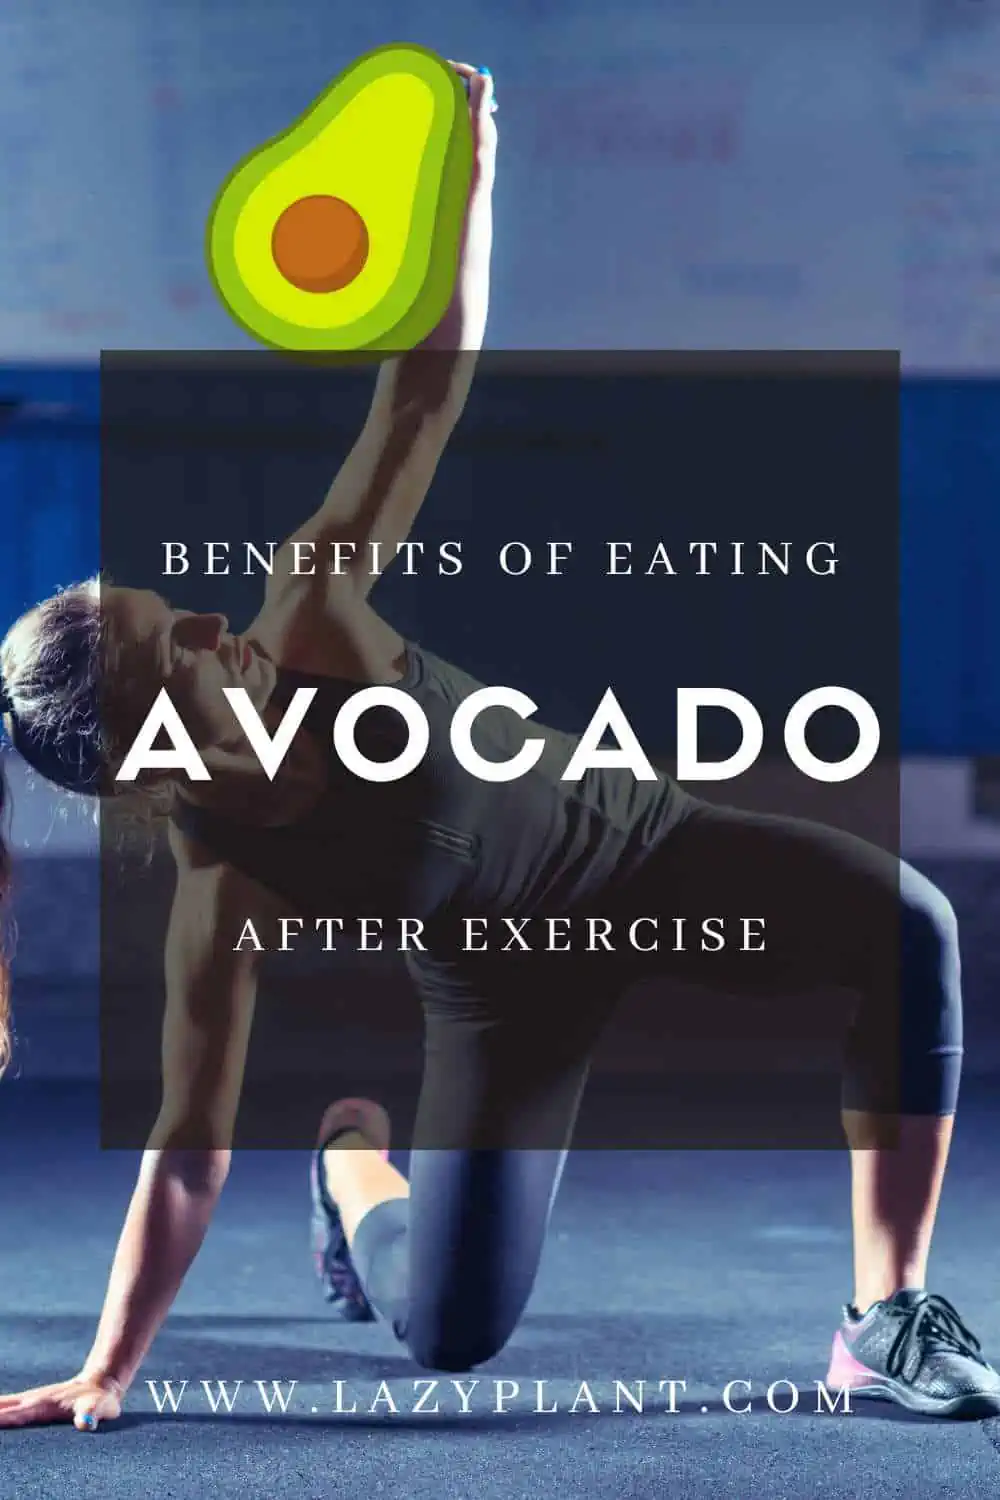 Benefits of eating avocado after strenuous exercise.